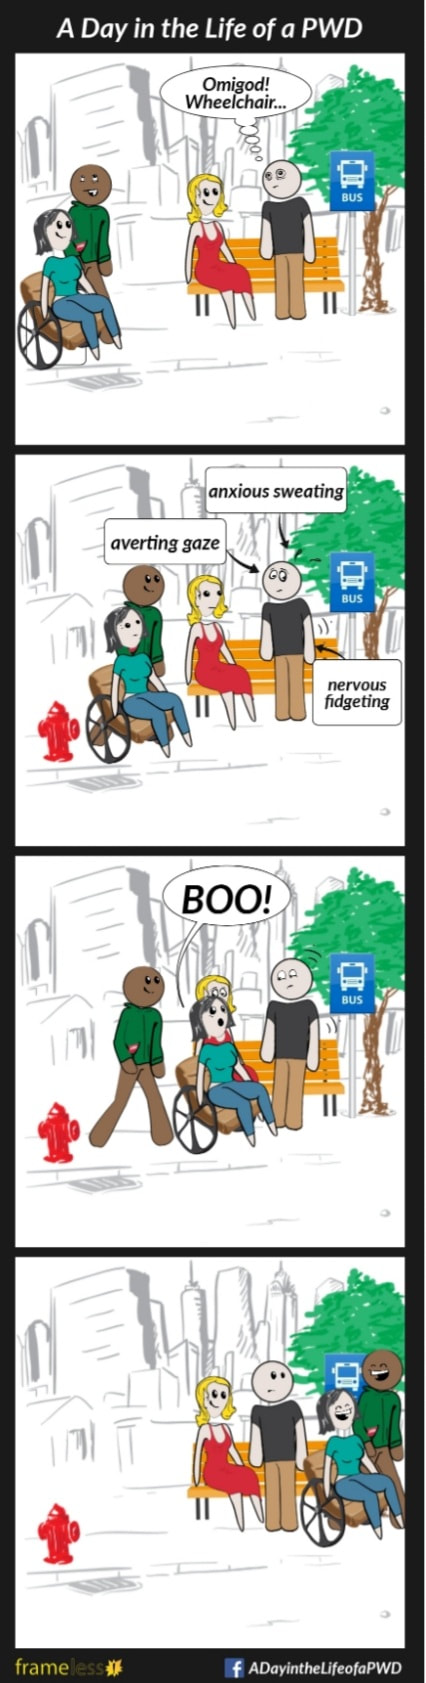 COMIC STRIP 
A Day in the Life of a PWD (Person With a Disability) 

Frame 1:
A woman in a wheelchair and her friend are walking down a sidewalk. 
Another woman and a man are waiting at a bus stop. The man sees the wheelchair user. 
MAN (thinking): Omigod! Wheelchair...

Frame 2:
Arrows point to the man with the labels:
-Anxious sweating
-Averted gaze
-Nervous fidgeting.
The wheelchair user notices his behaviour.

Frame 3:
The wheelchair user and her friend begin to pass the man.
WHEELCHAIR USER (to man): BOO!

Frame 4:
The wheelchair user and her friend continue on, giggling.